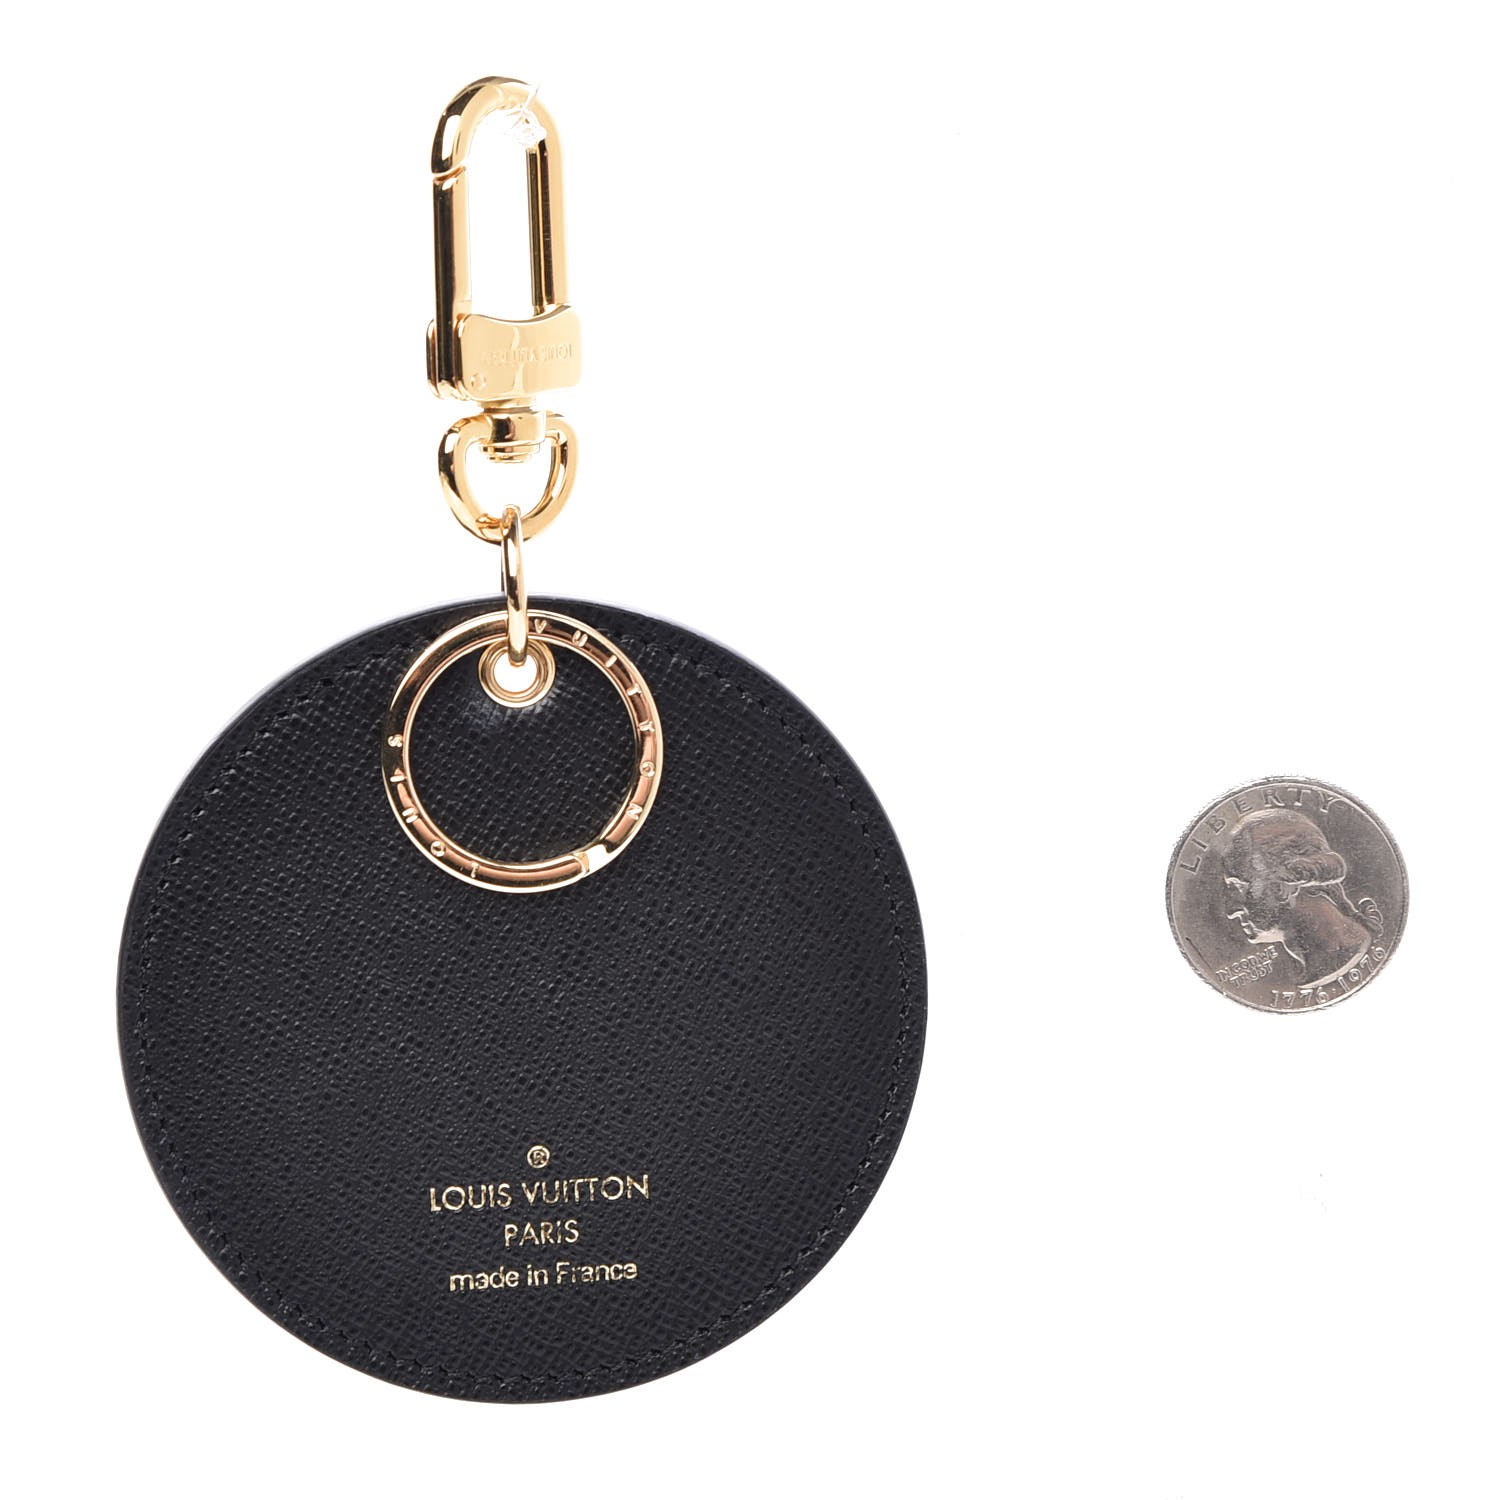 Louis Vuitton Mister Keepall Key Holder and Bag Charm